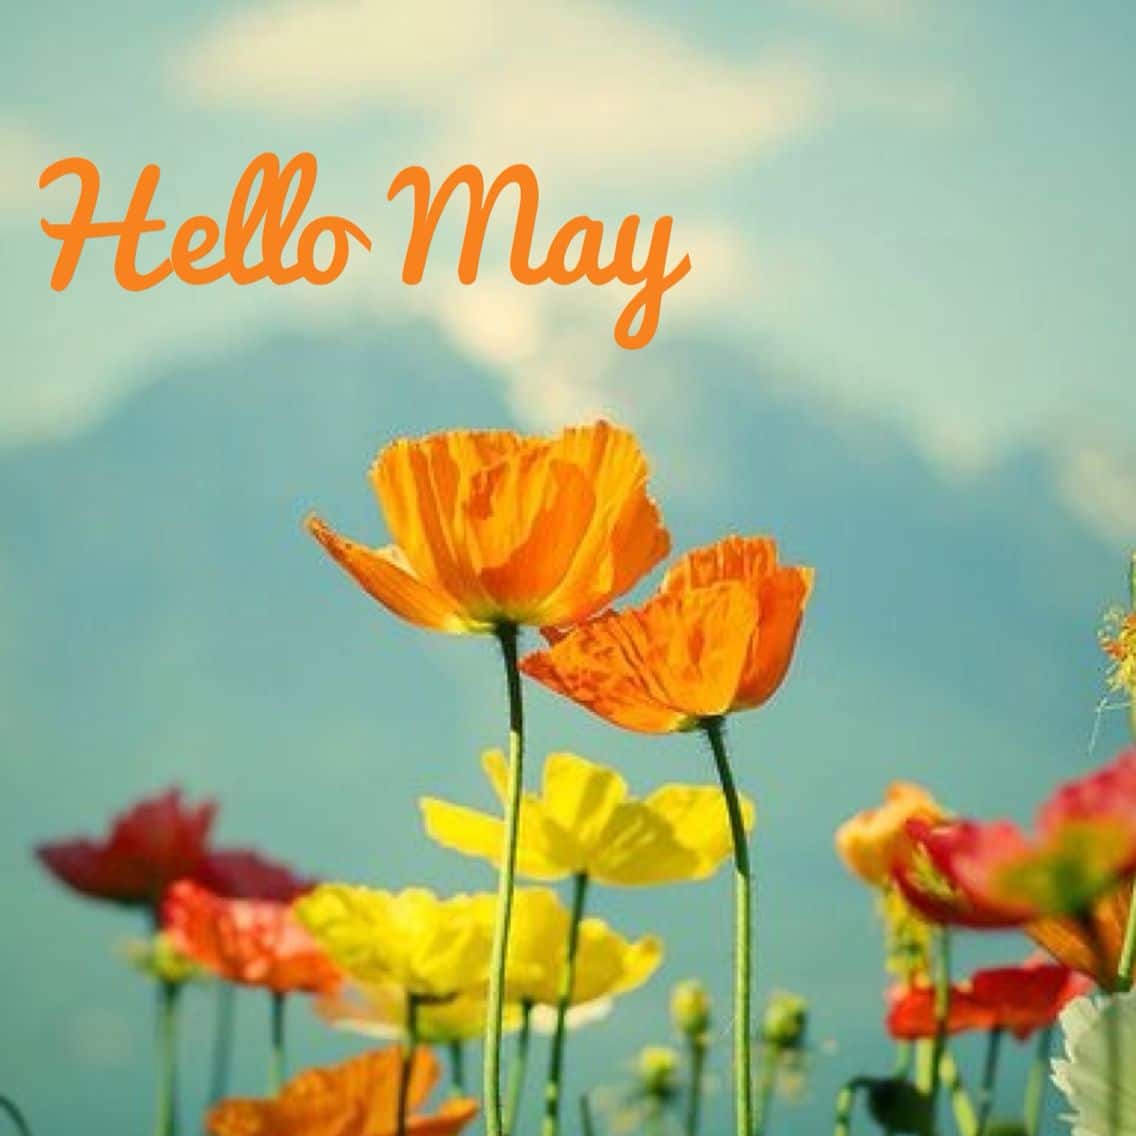 Hello May Pictures | Oppidan Library